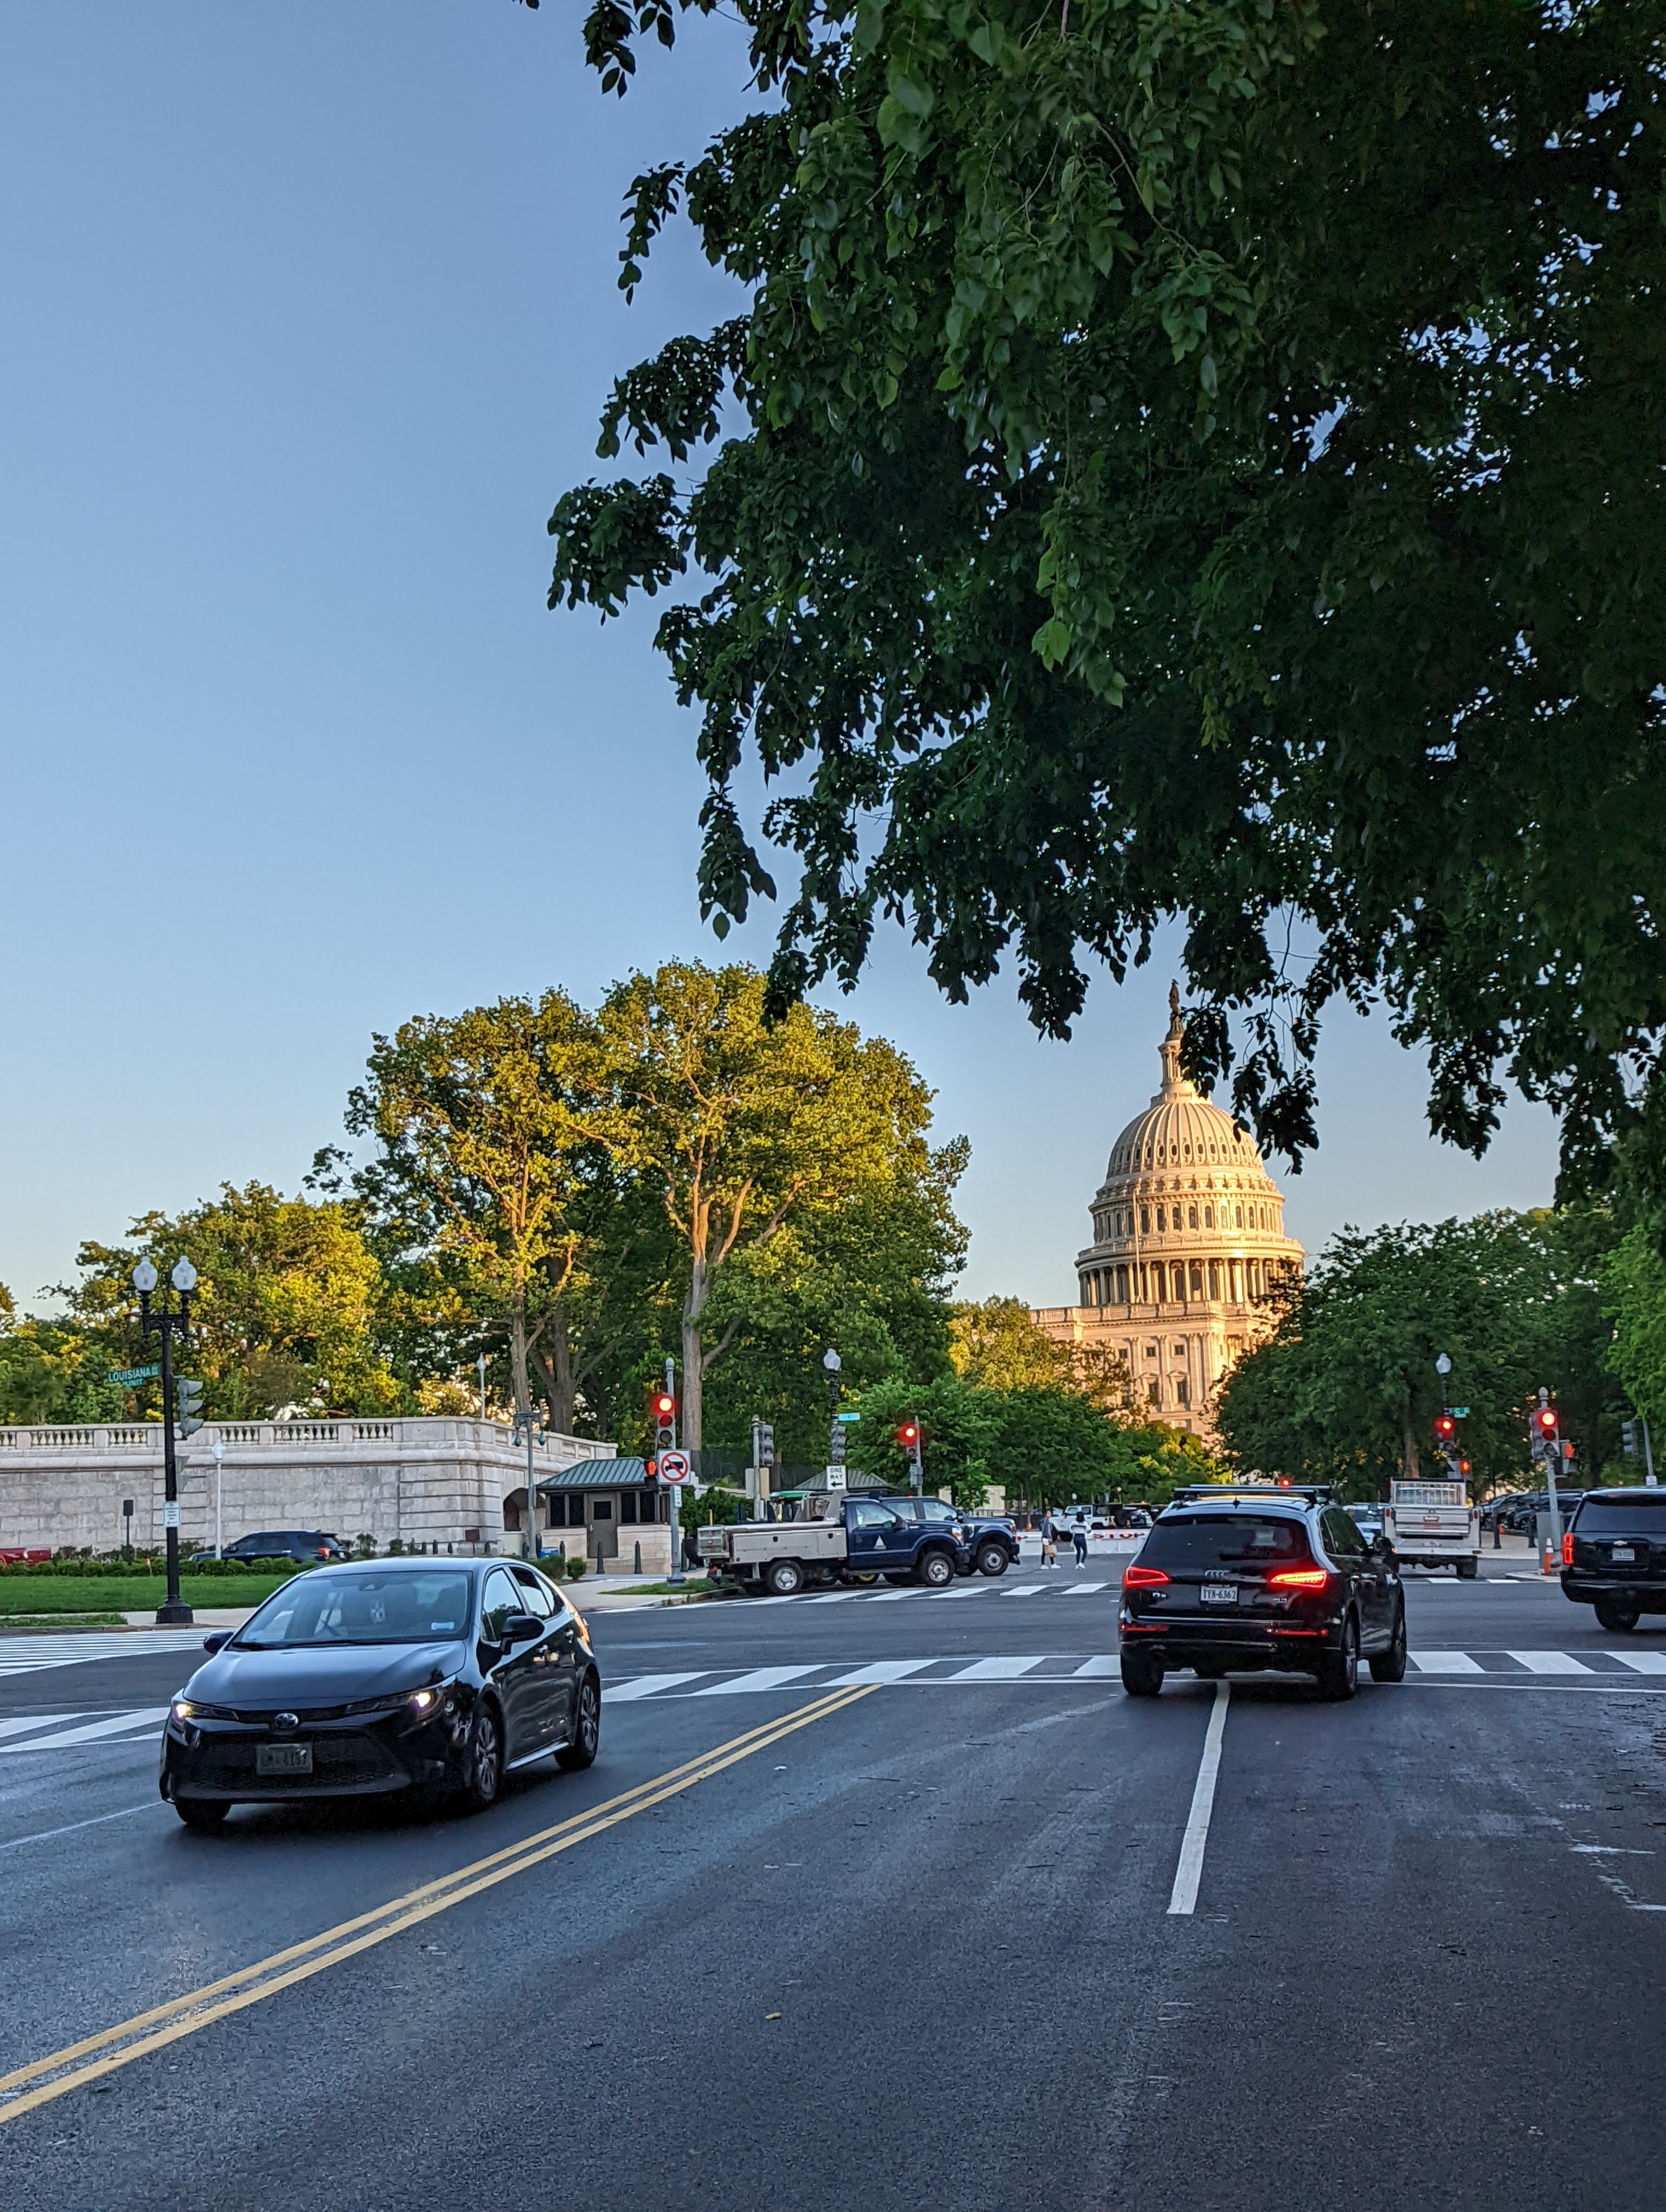 Cars traveling on asphalt roadway with U.S. Capitol building in background in Washington, D.C.